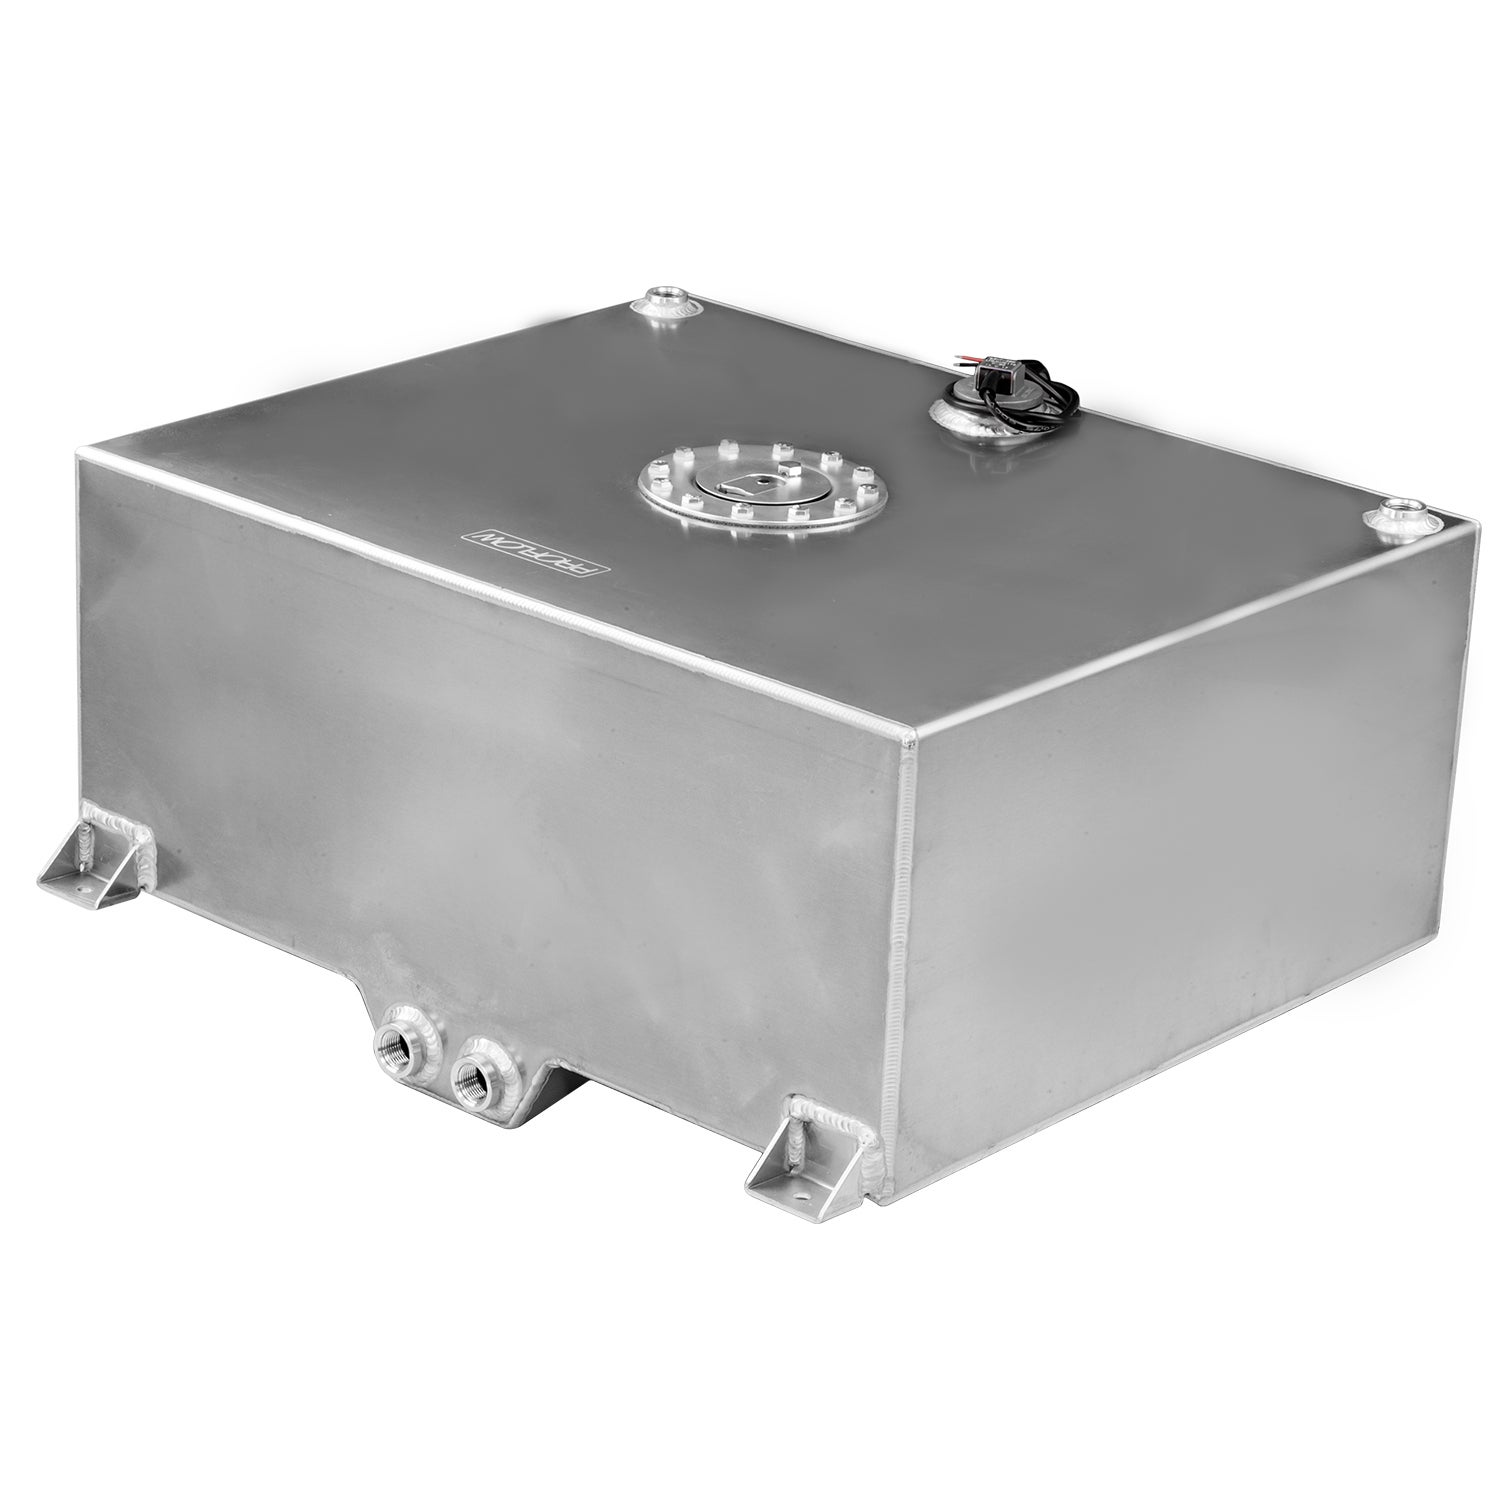 Proflow Fuel Cell Tank 15g 57 Aluminium Natural 510 x 4600 x 260mm With Sender Two -10 AN Female Outlets Each